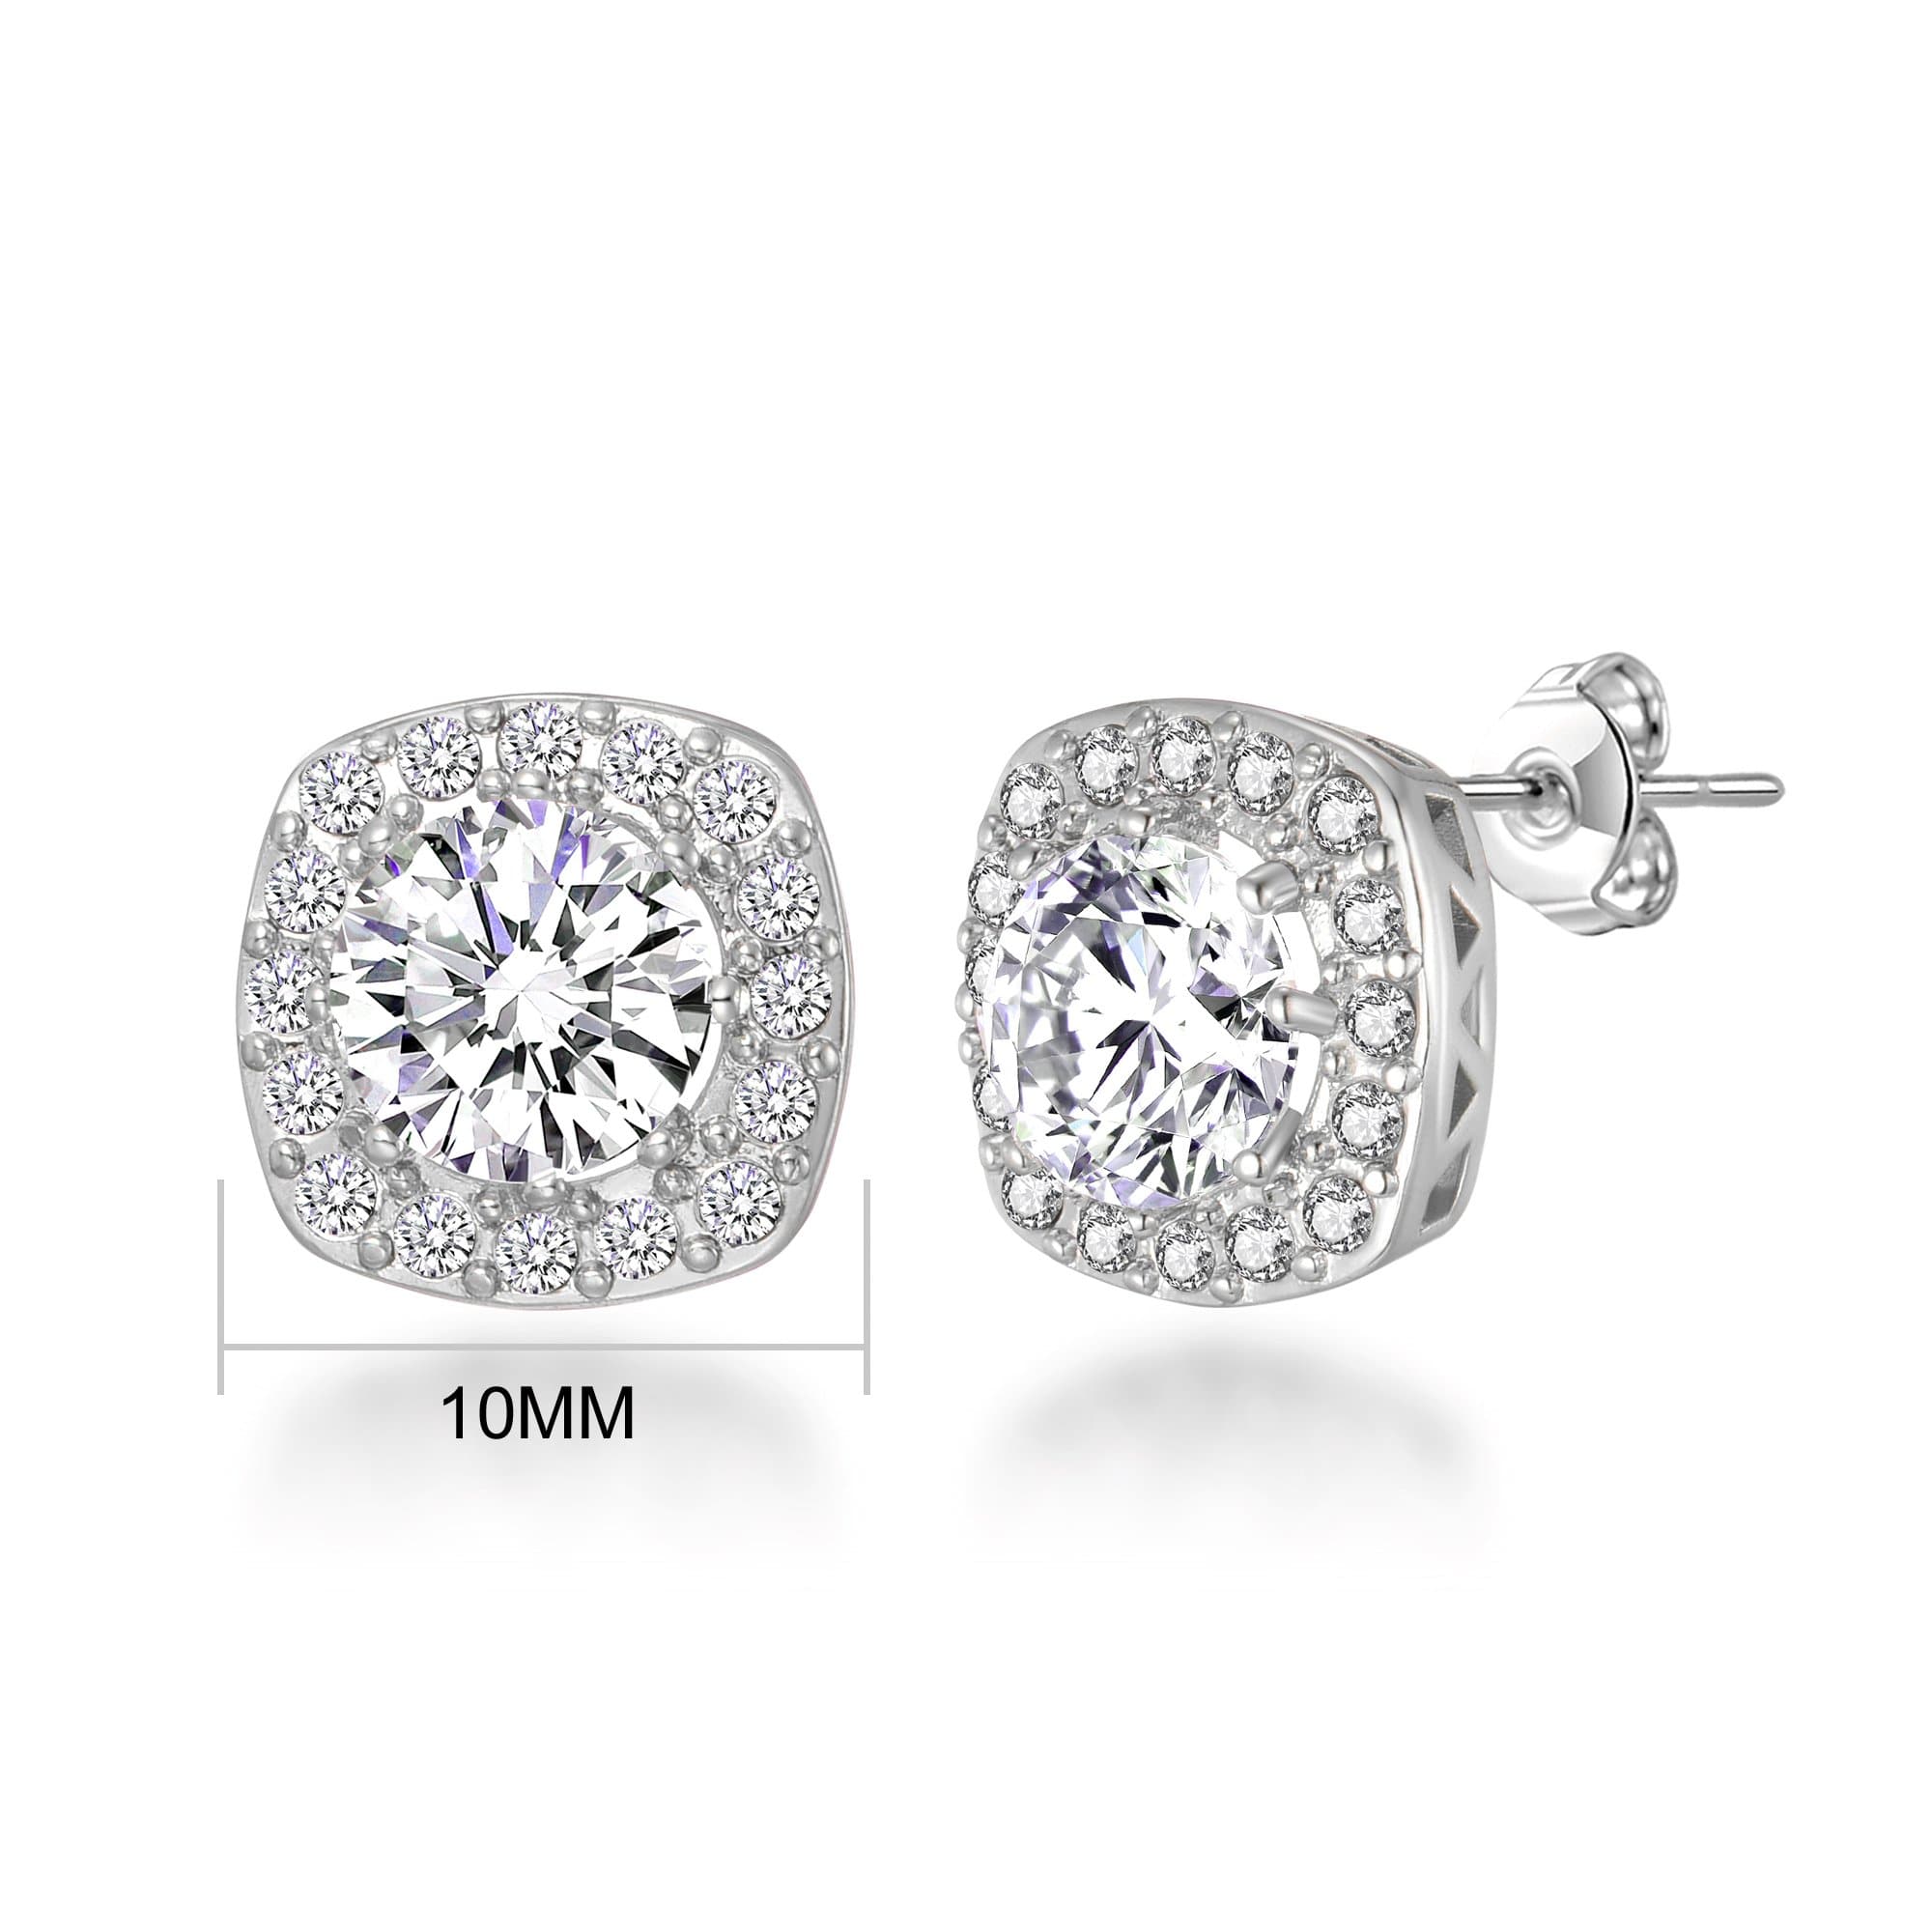 Silver Plated Square Halo Earrings Created with Zircondia® Crystals